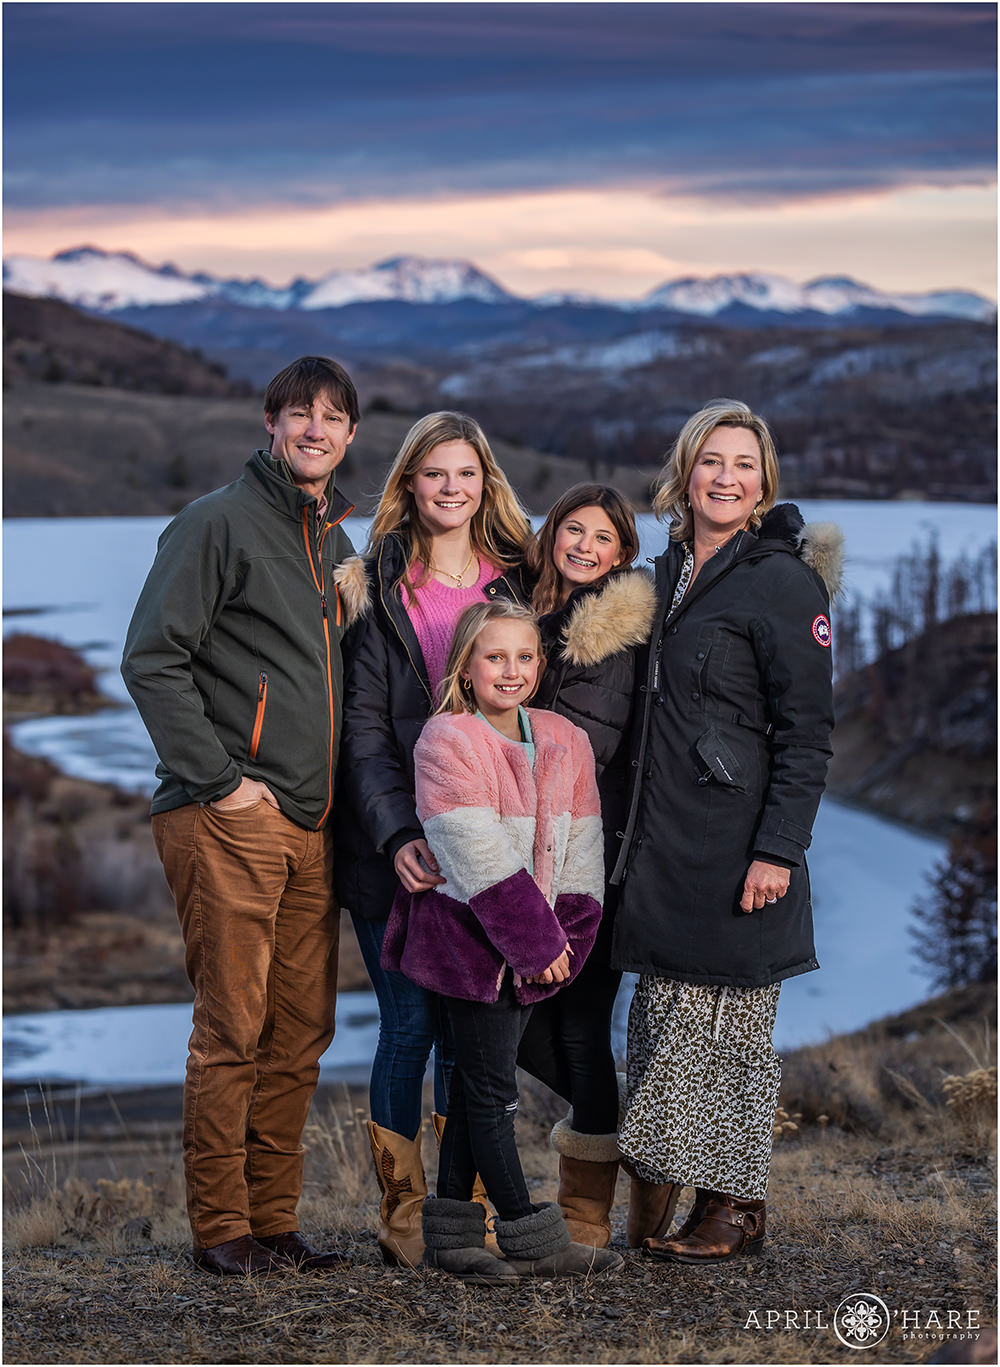 Family of 5 stand in front of a pretty sunset mountain backdrop in Granby Colorado